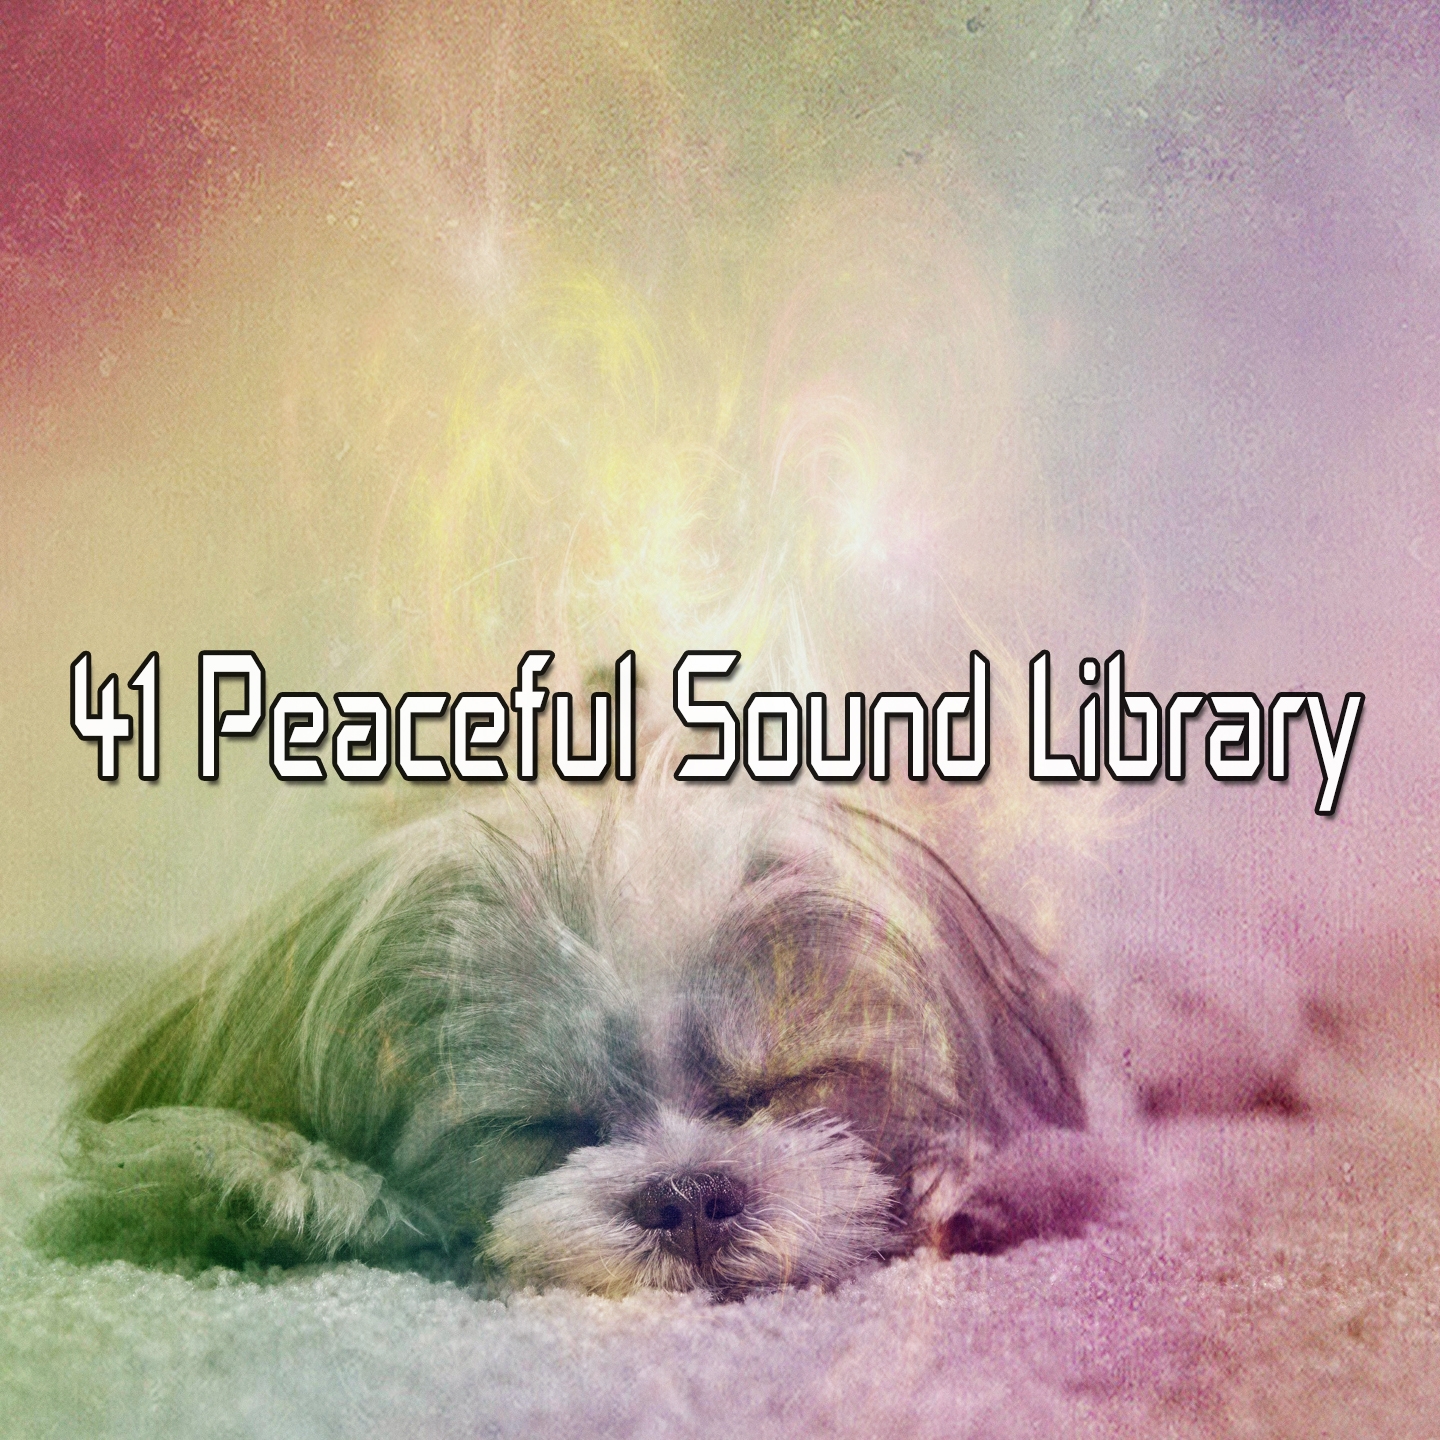 41 Peaceful Sound Library